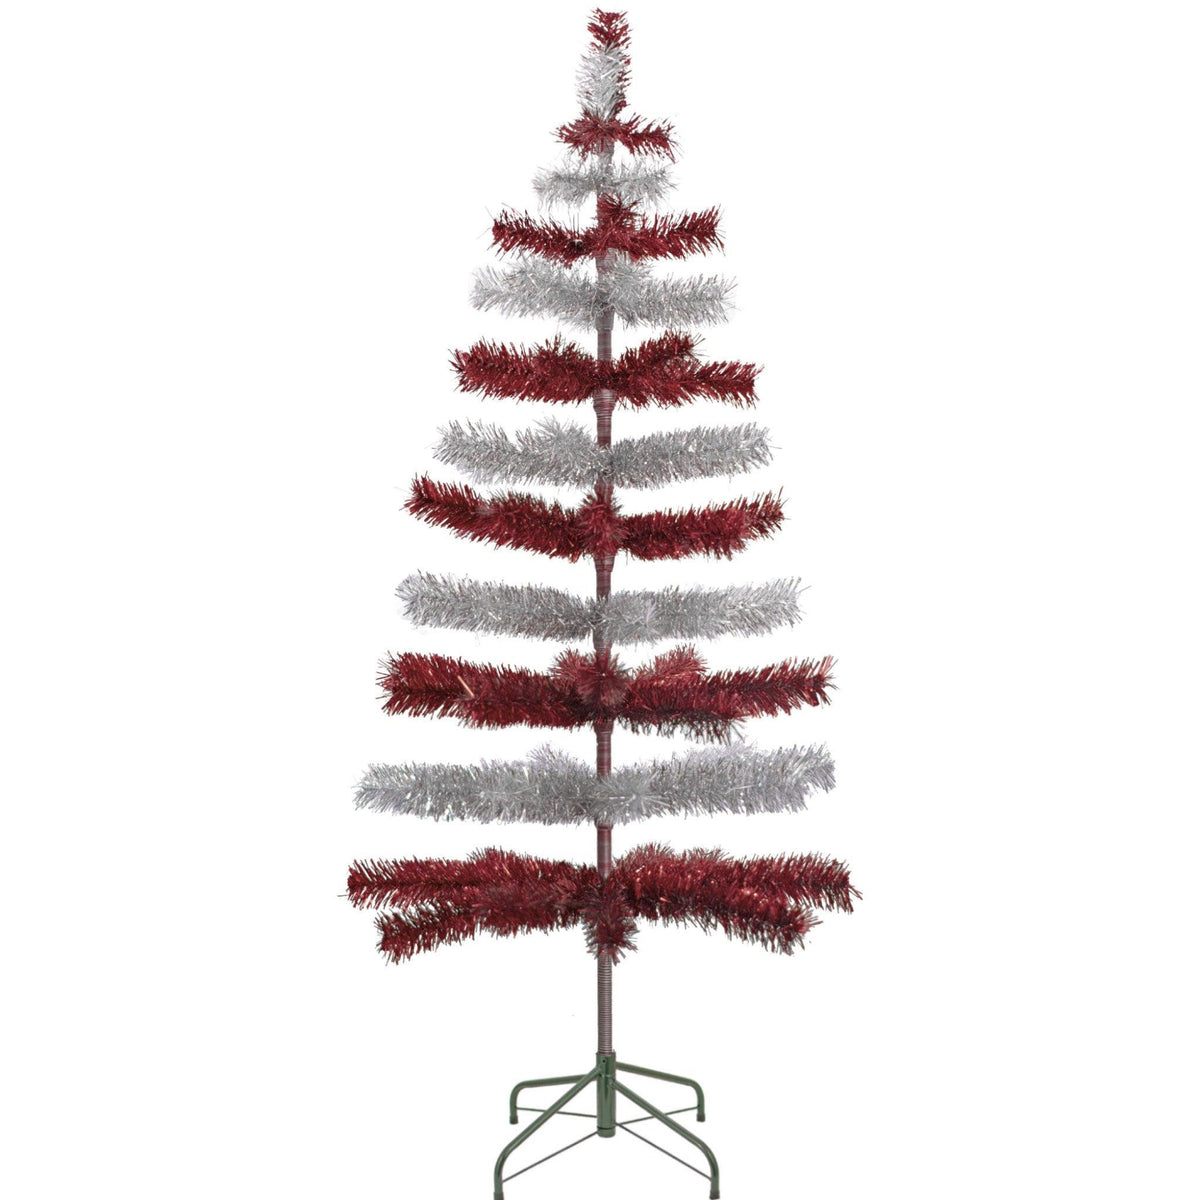 Red & Silver Layered Tinsel Christmas Trees! Decorate for the holidays with a Shiny Red and Metallic Silver retro-style Christmas Tree. On sale now at leedisplay.com